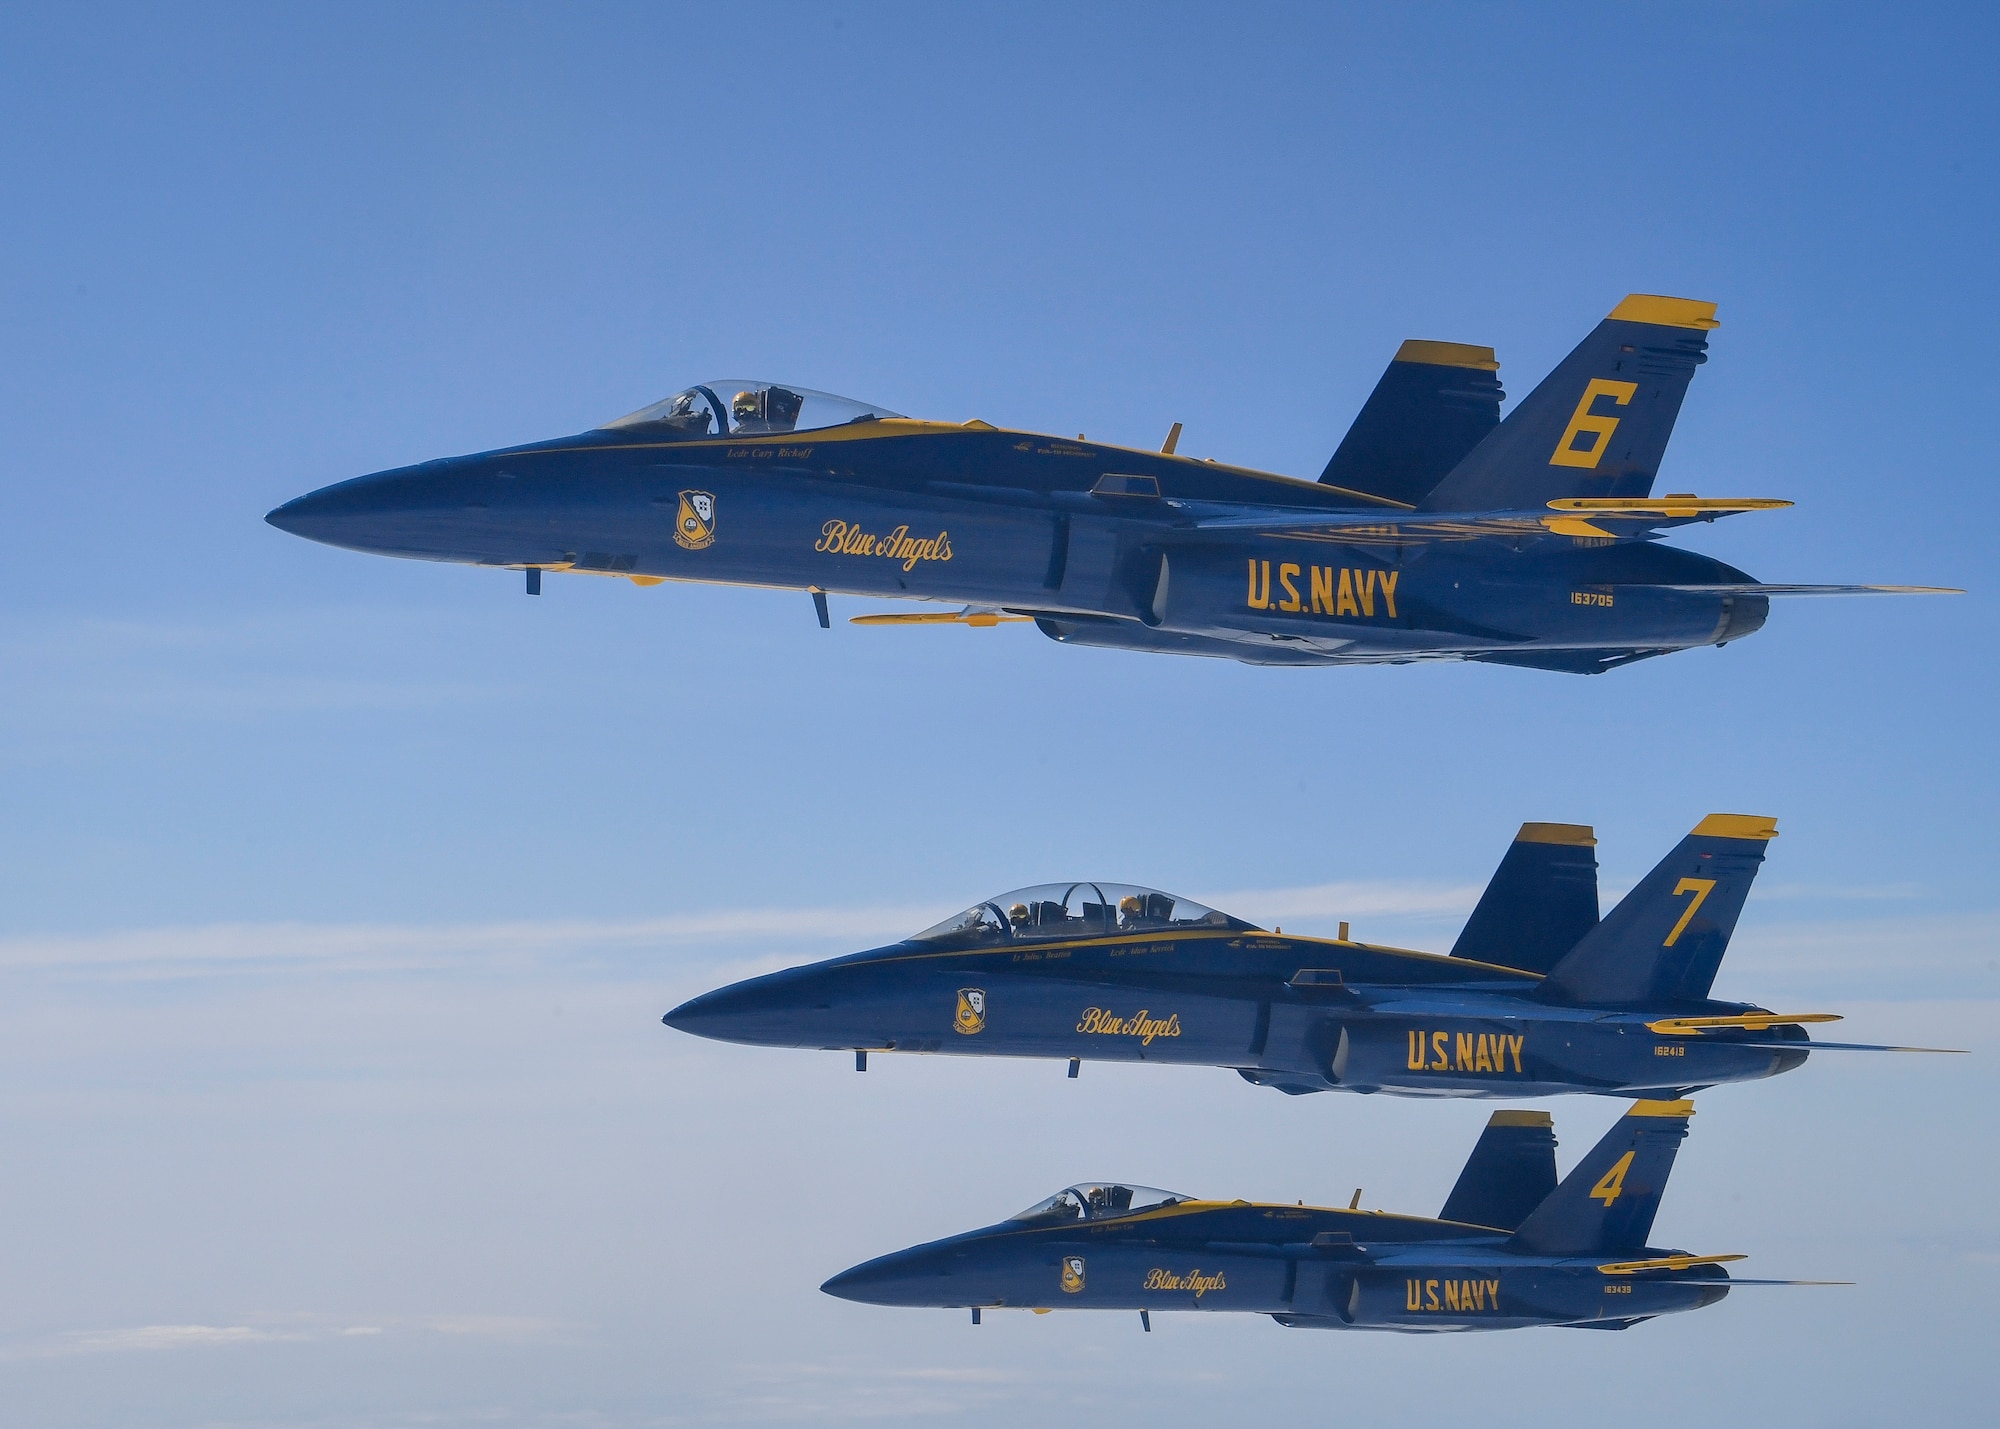 An F/A-18 Hornet assigned to the U.S. Navy Flight Blue Angels approaches a KC-10 Extender assigned to the 305th Air Mobility Squadron from Joint Base McGuire-Dix-Lakehurst, N.J., April 28, 2020. The Blue Angels conducted a joint flyover with the U.S. Air Force Thunderbirds as part of America Strong, an effort to honor healthcare workers, first responders and other essential personnel who are working on the front lines to combat COVID-19. (U.S. Air Force photo by Staff Sgt. Jake Carter)